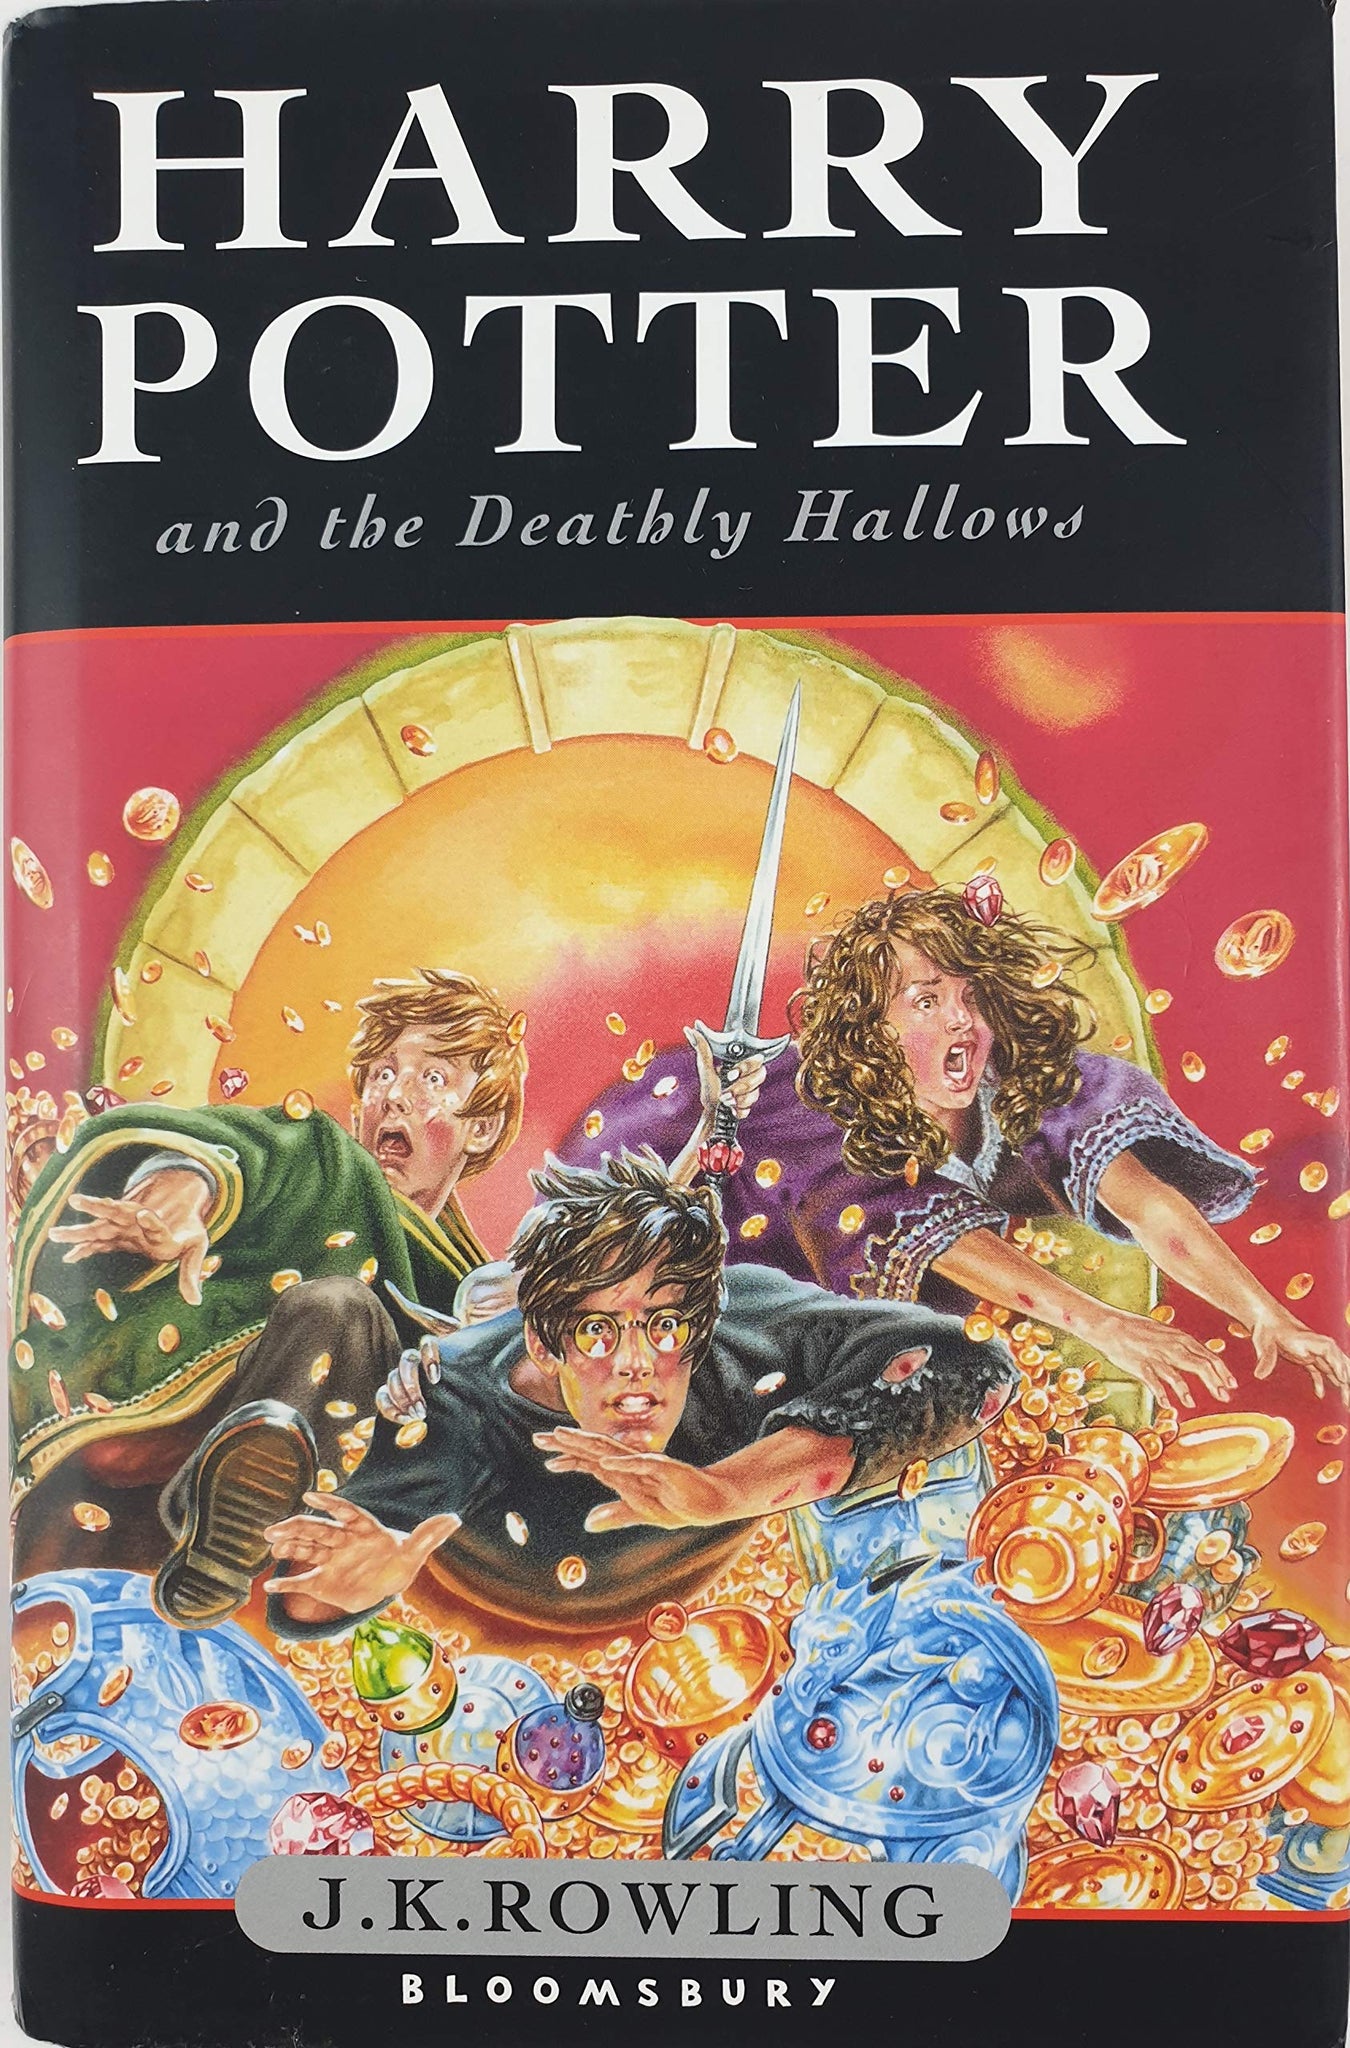 Hardcover, Canadian edition of Harry Potter and the Deathly Hollows printed by Rainforest Books